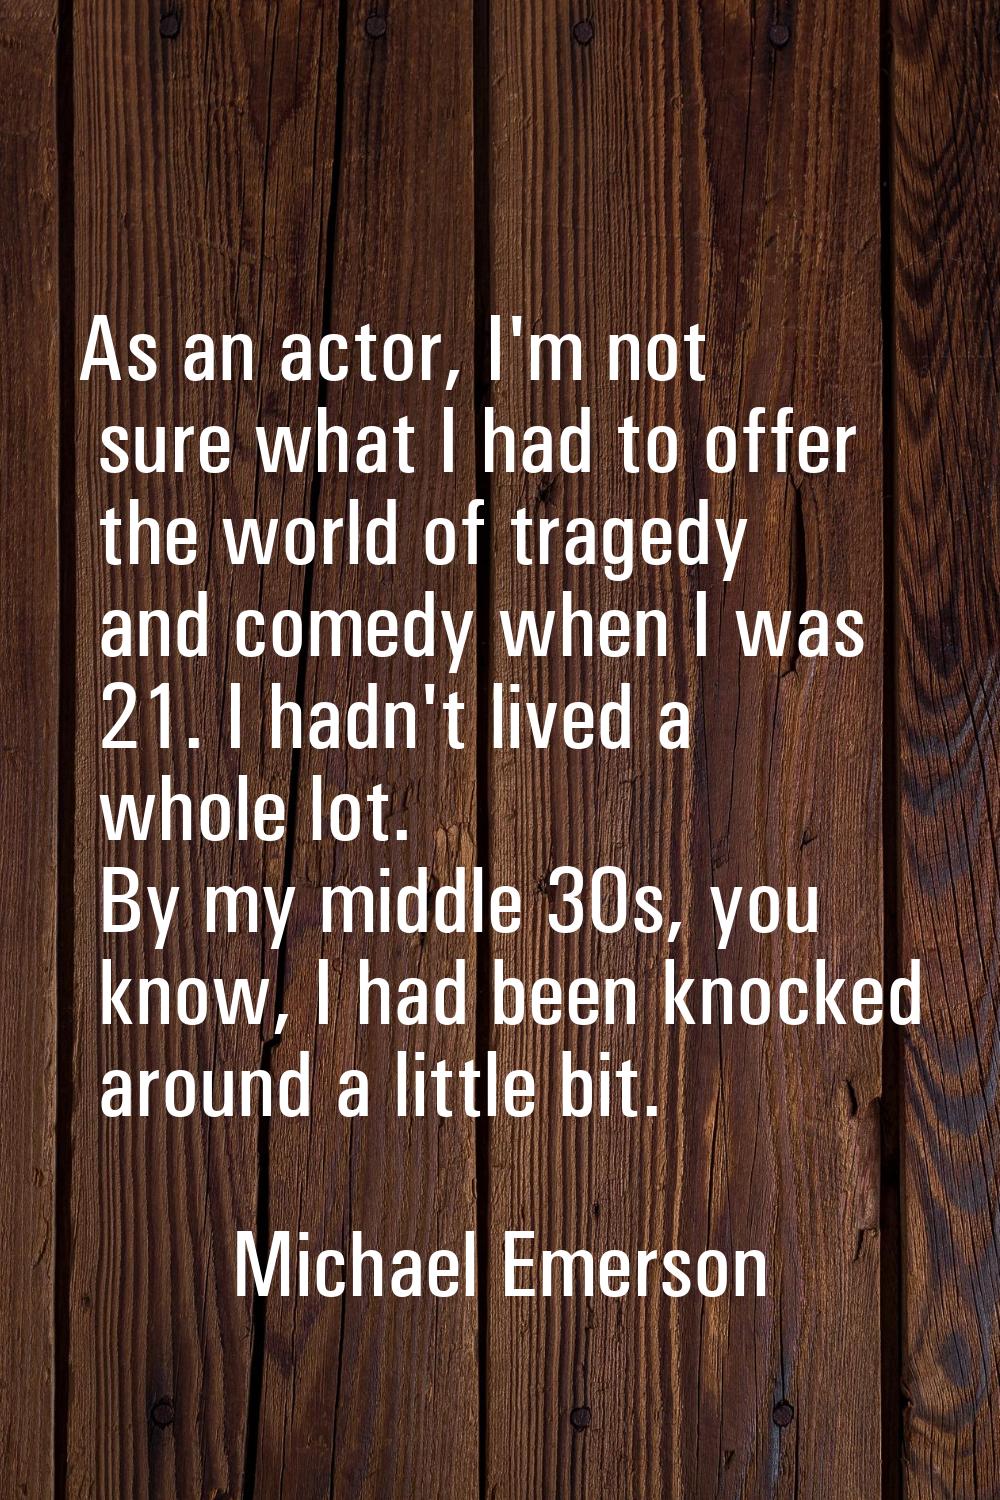 As an actor, I'm not sure what I had to offer the world of tragedy and comedy when I was 21. I hadn